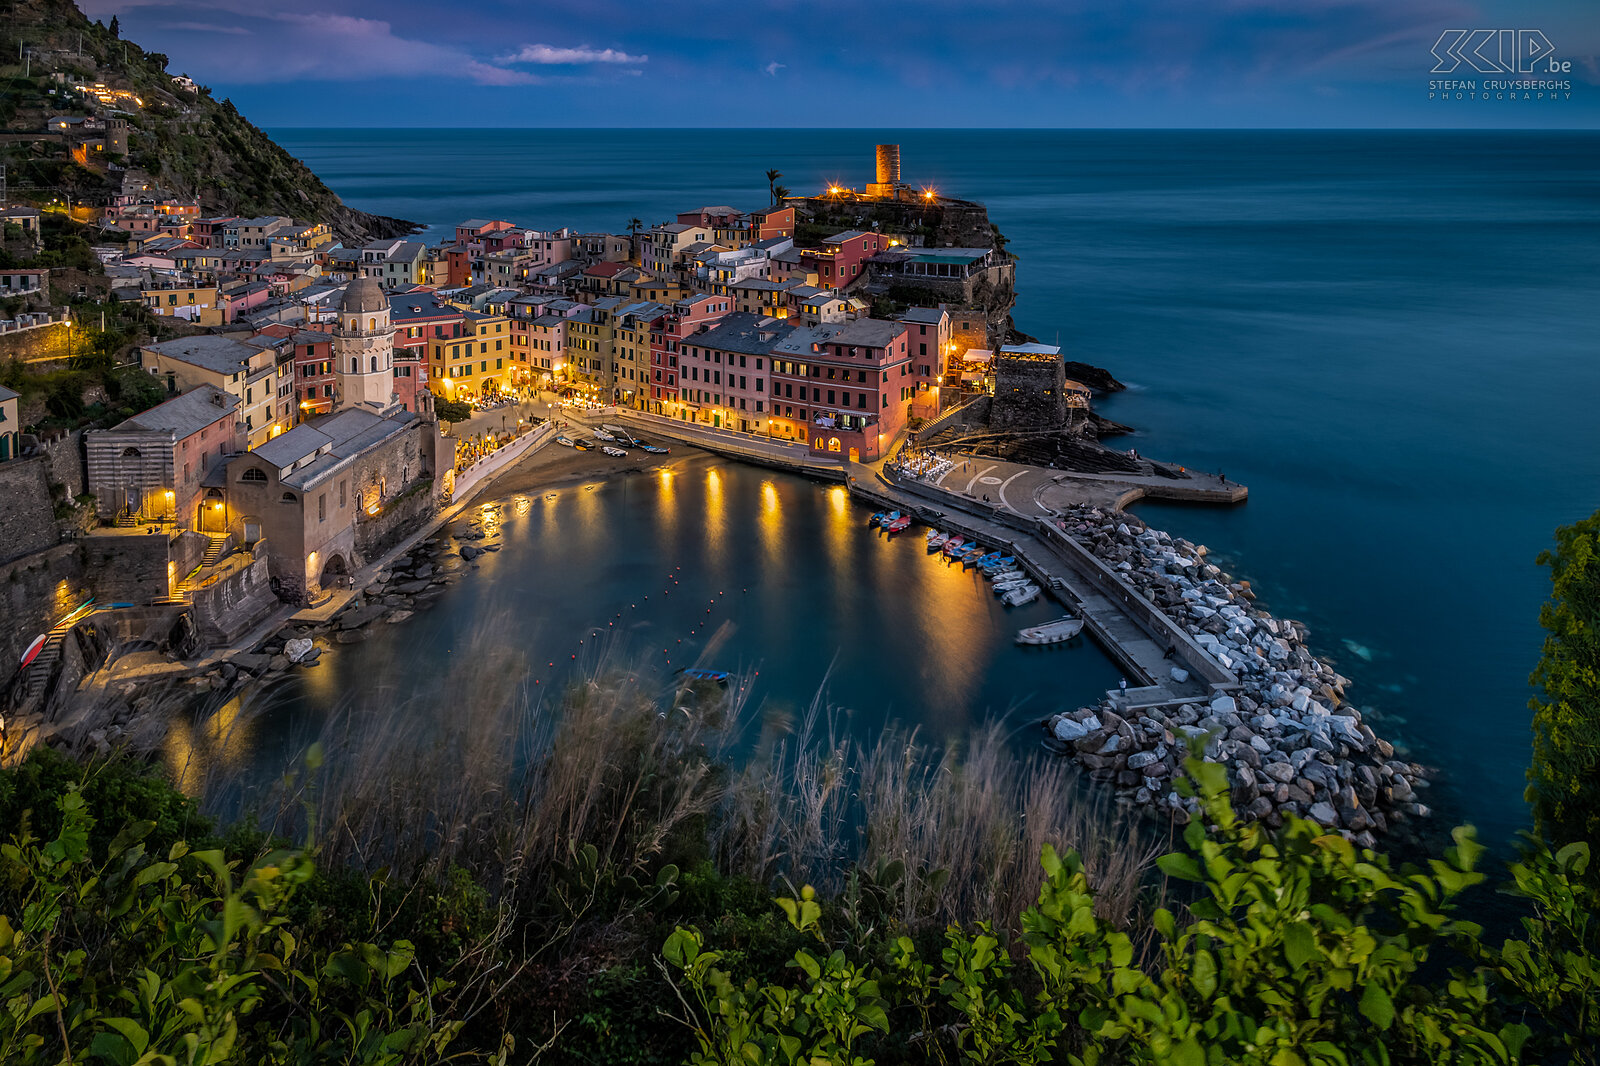 Vernazza - By night Vernazza is one of the five villages of Cinque Terre. It has a particularly beautiful harbor and is very photogenic. Stefan Cruysberghs